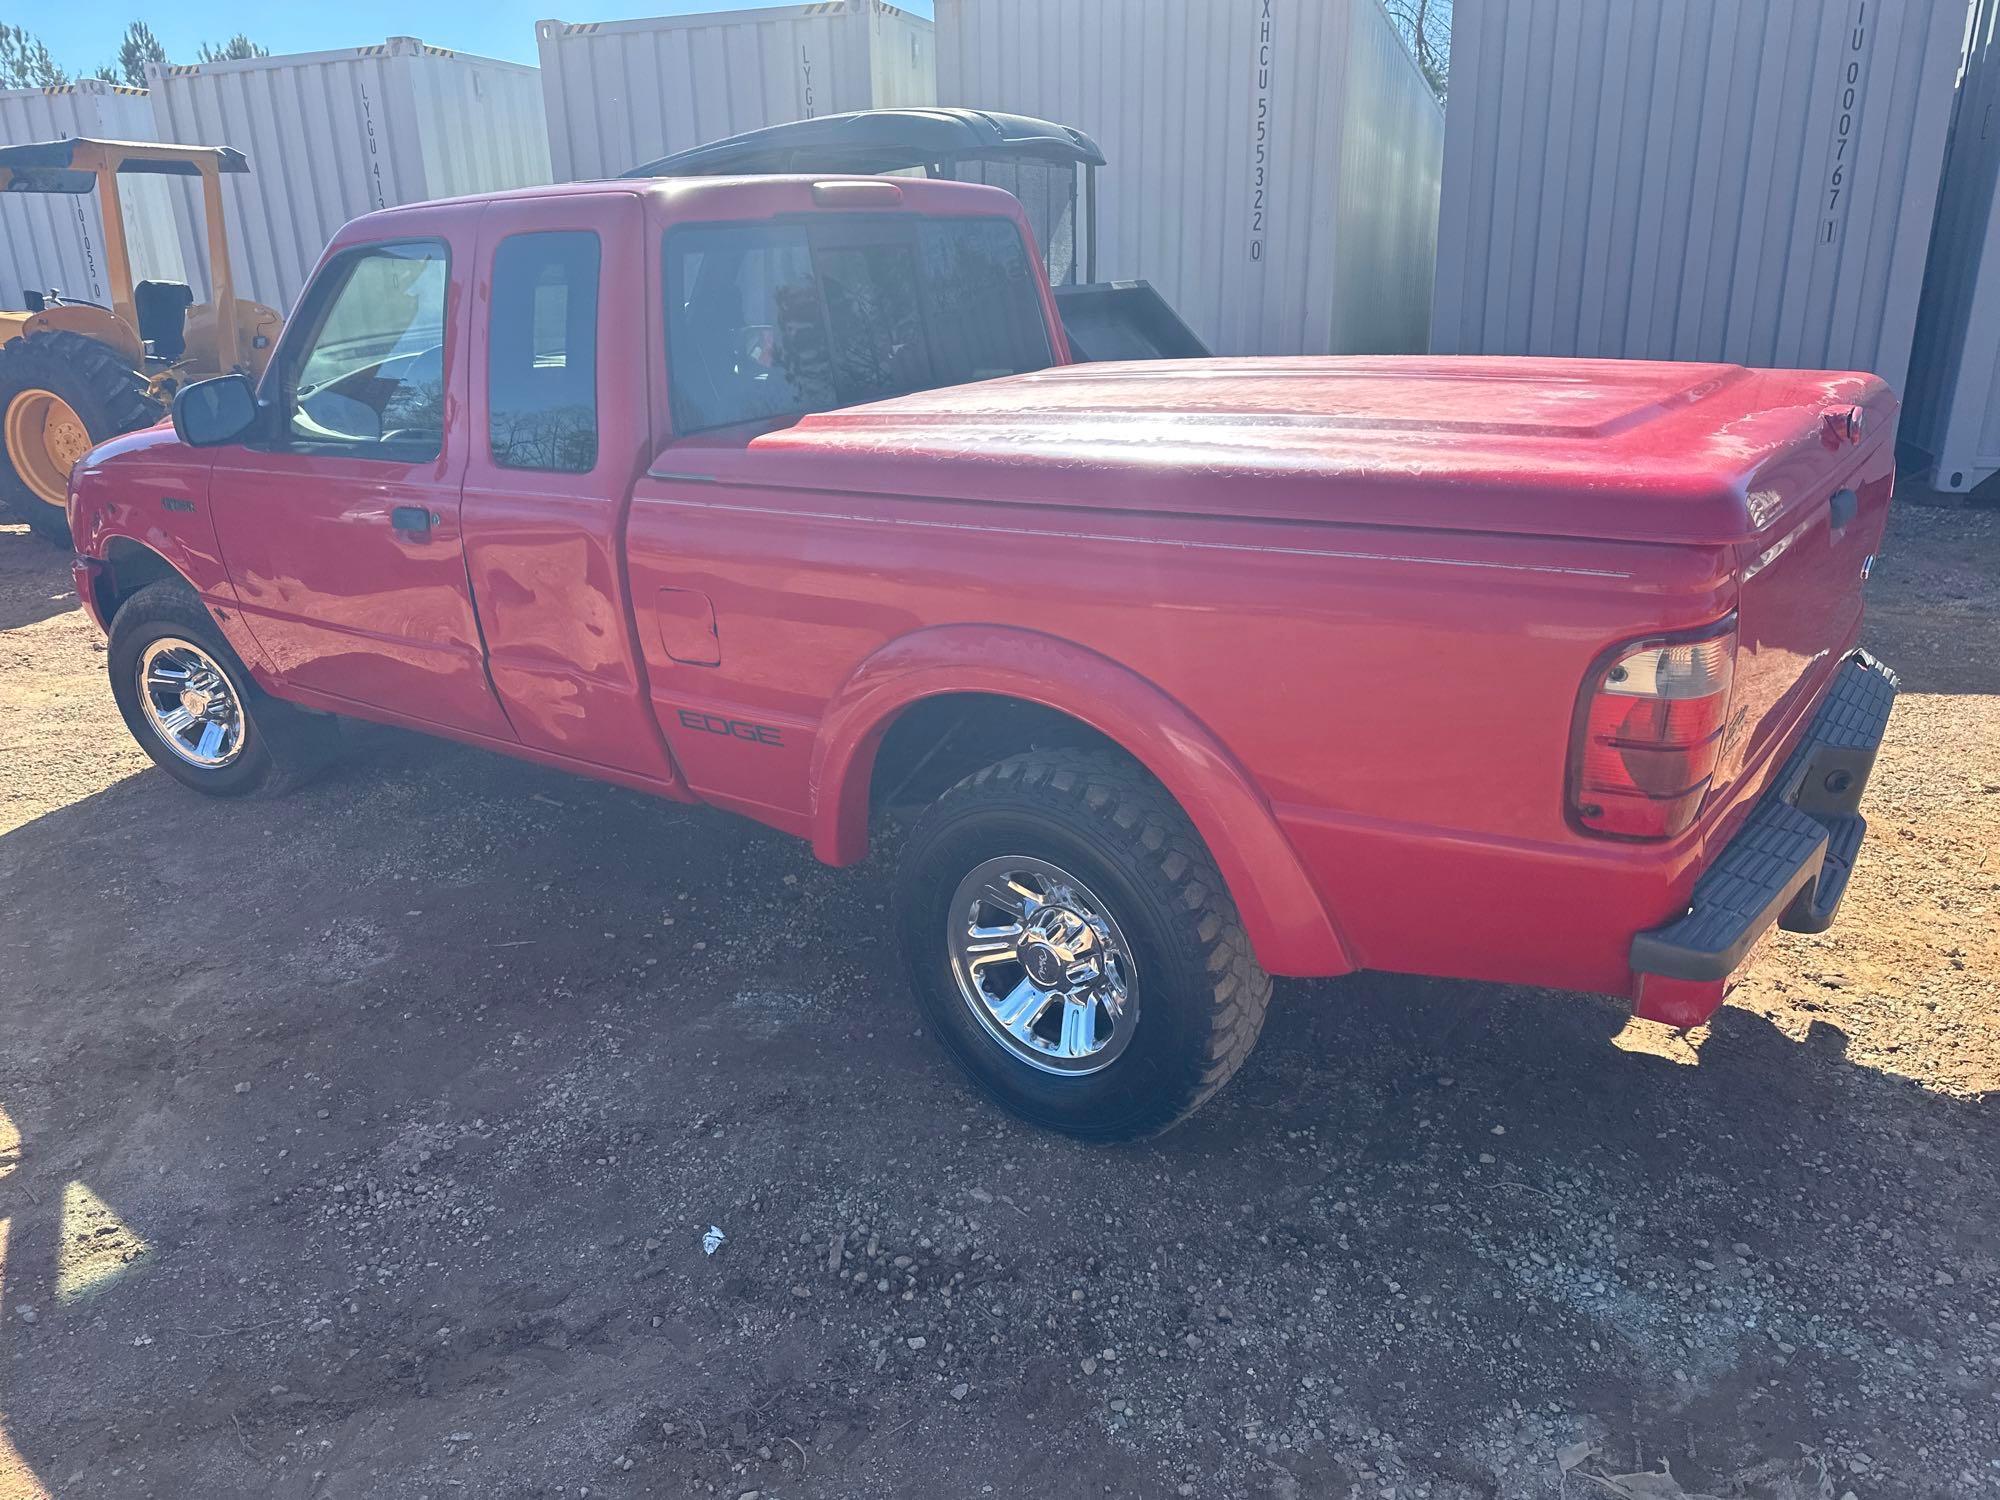 2002 FORD RANGER 2WD EXTENDED CAB TRUCK